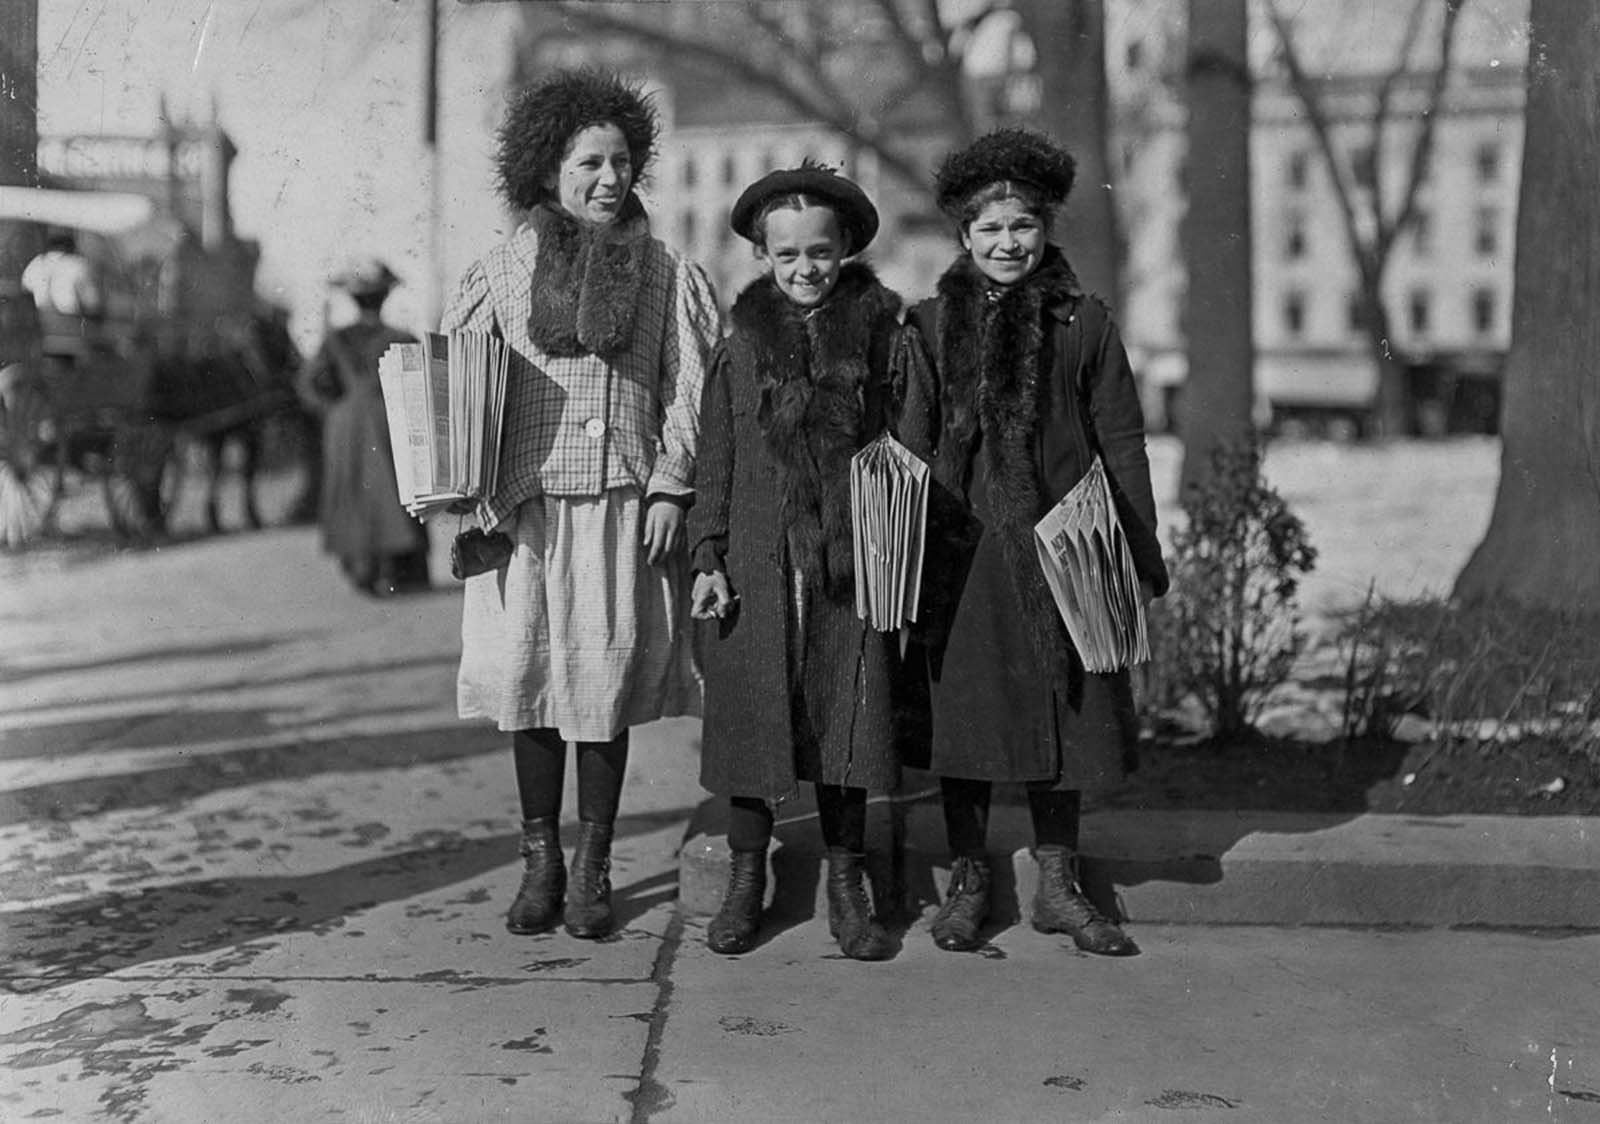 Have been selling two years. Youngest, Yedda Welled, is 11-years-old. Next, Rebecca Cohen, is 12. Next, Rebecca Kirwin, is 14. Hartford, Connecticut,  1909.